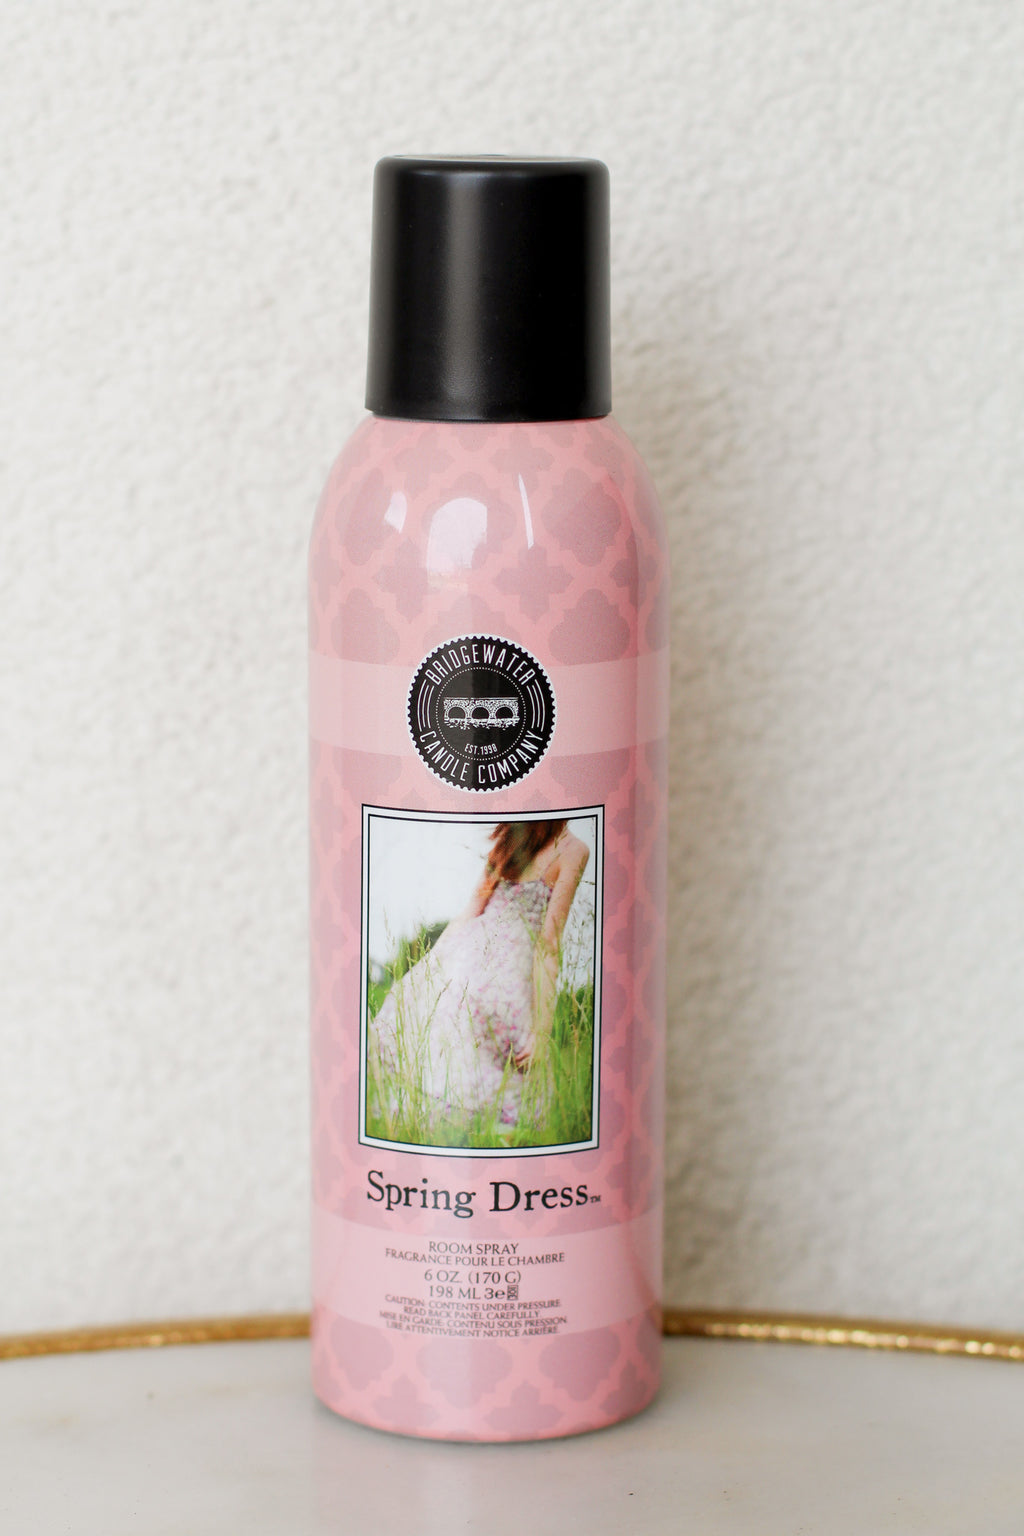 Wrinkle Release Spray-Sweet Grace – Everyday Chic Boutique